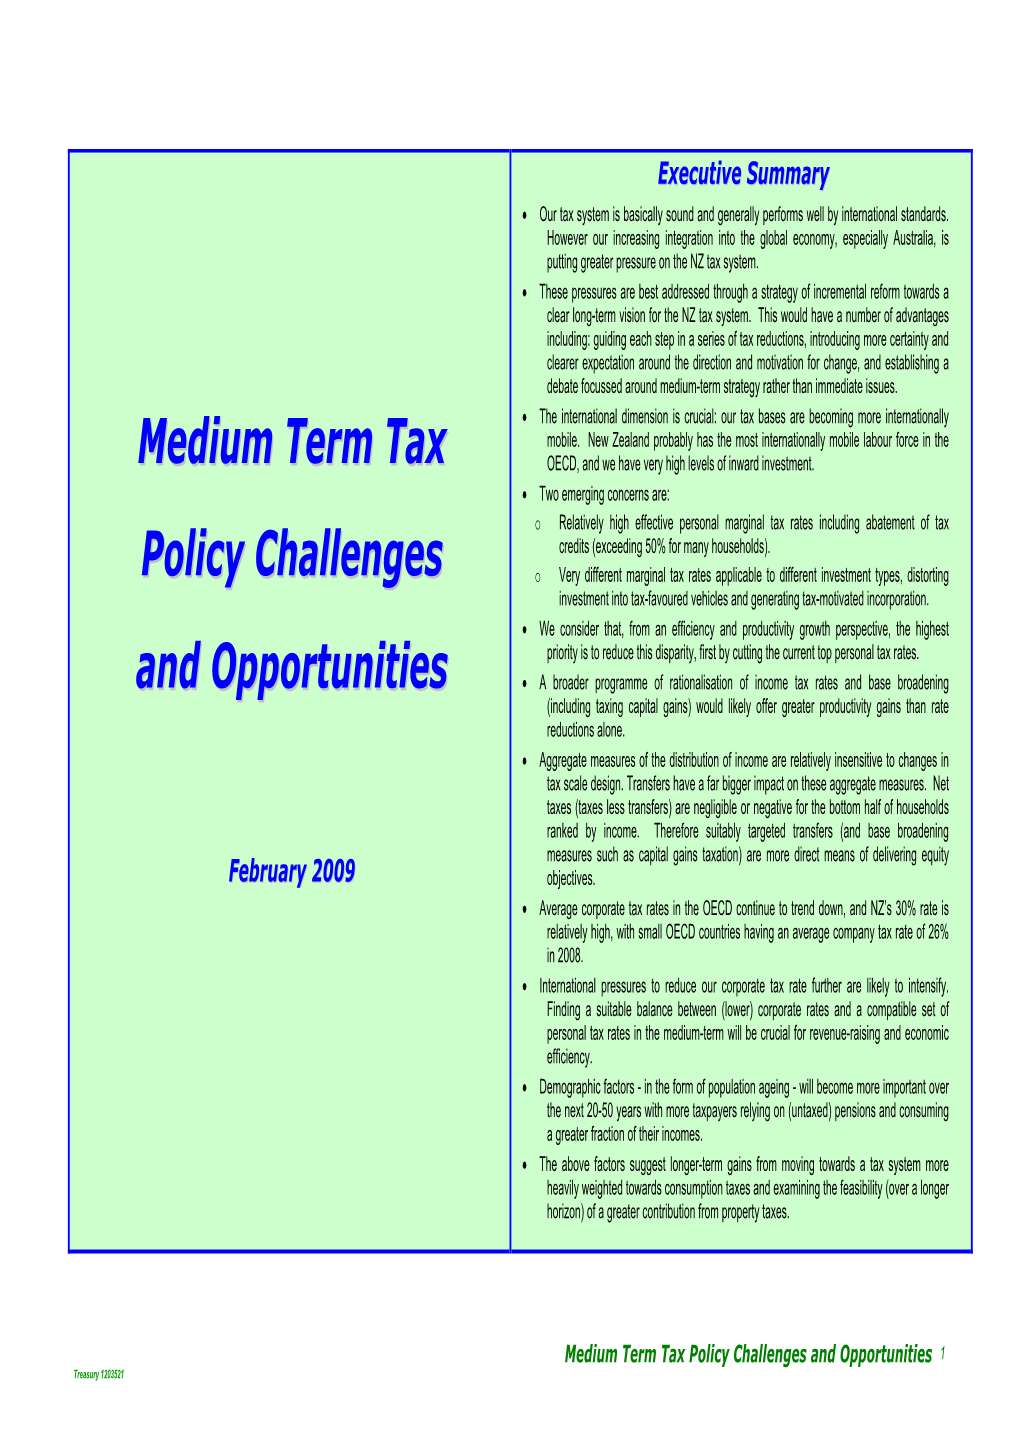 Medium Term Tax Policy Challenges and Opportunities 1 Treasury 1203521